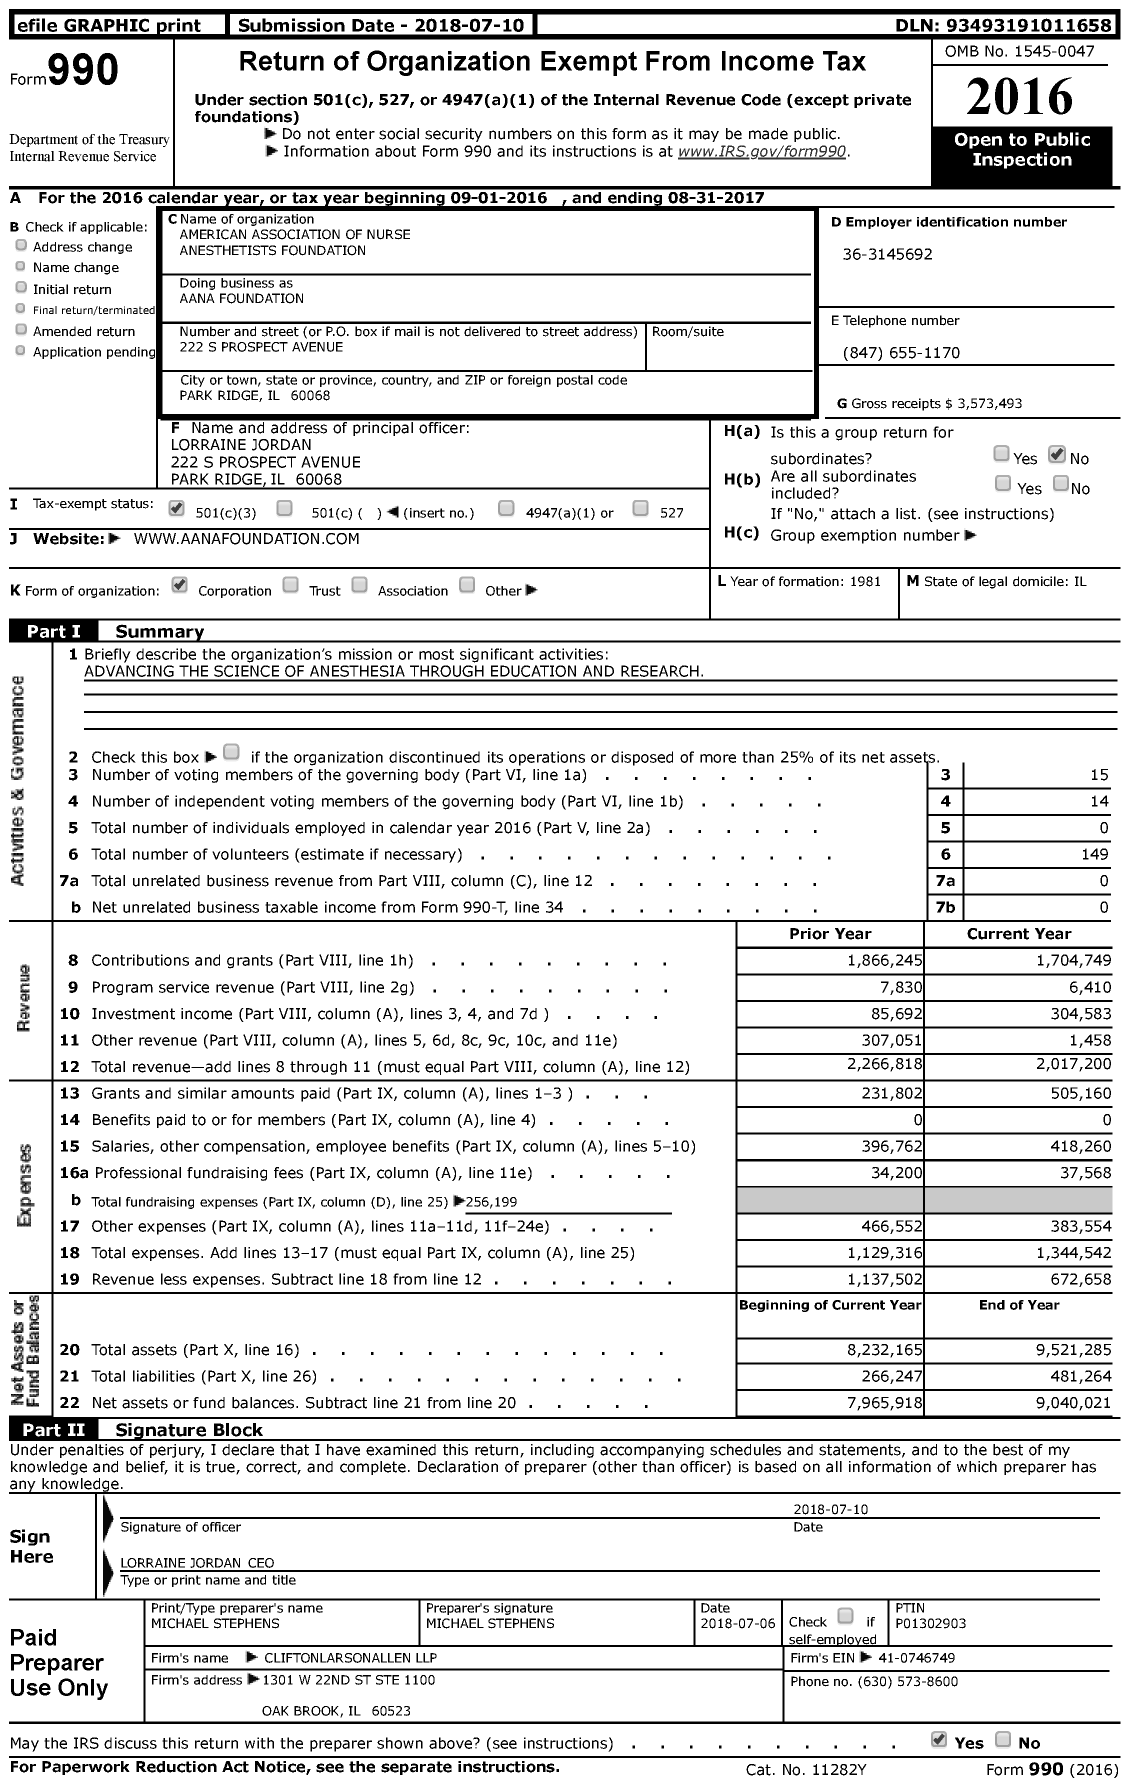 Image of first page of 2016 Form 990 for American Association of Nurse Anesthetists Foundation (AANA)